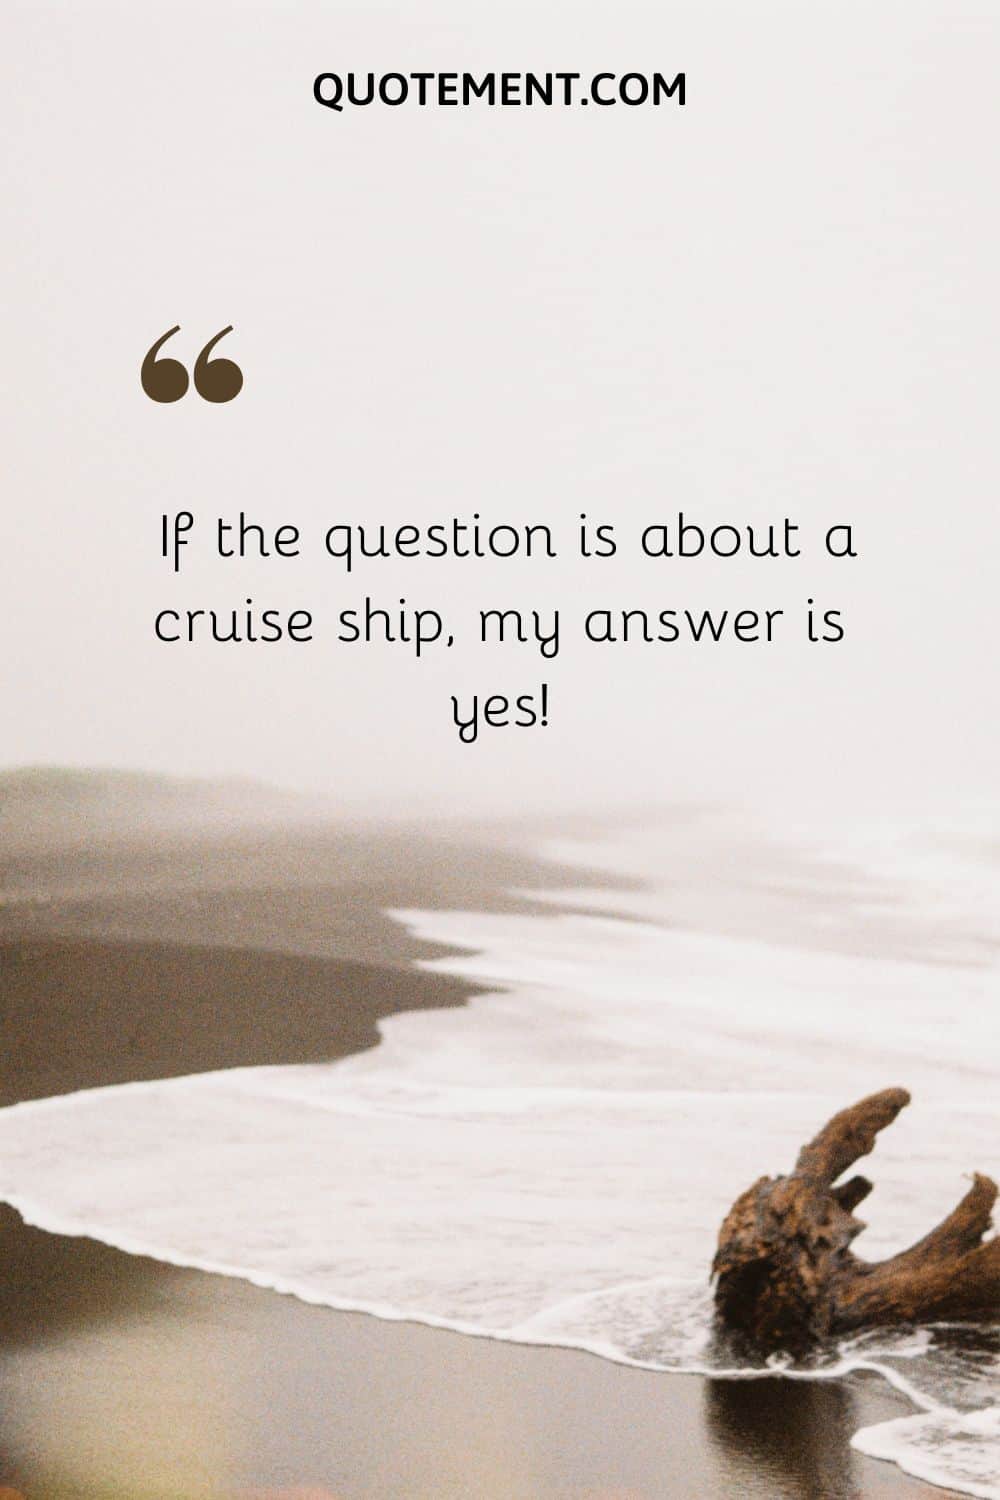 If the question is about a cruise ship, my answer is yes!